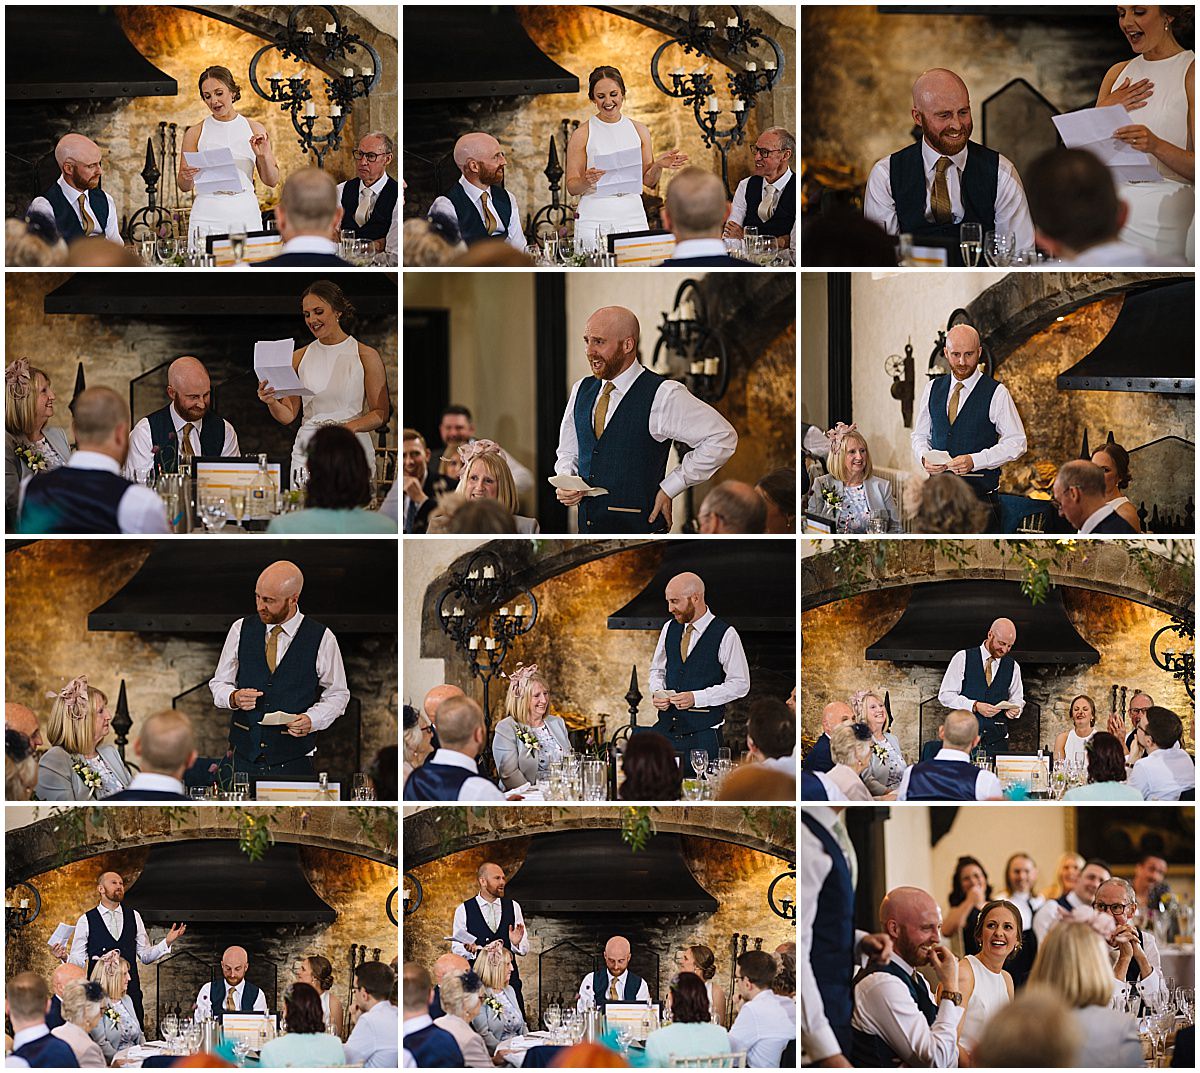 A collage of twelve images showing a man and woman giving speeches at a wedding reception in front of smiling guests.